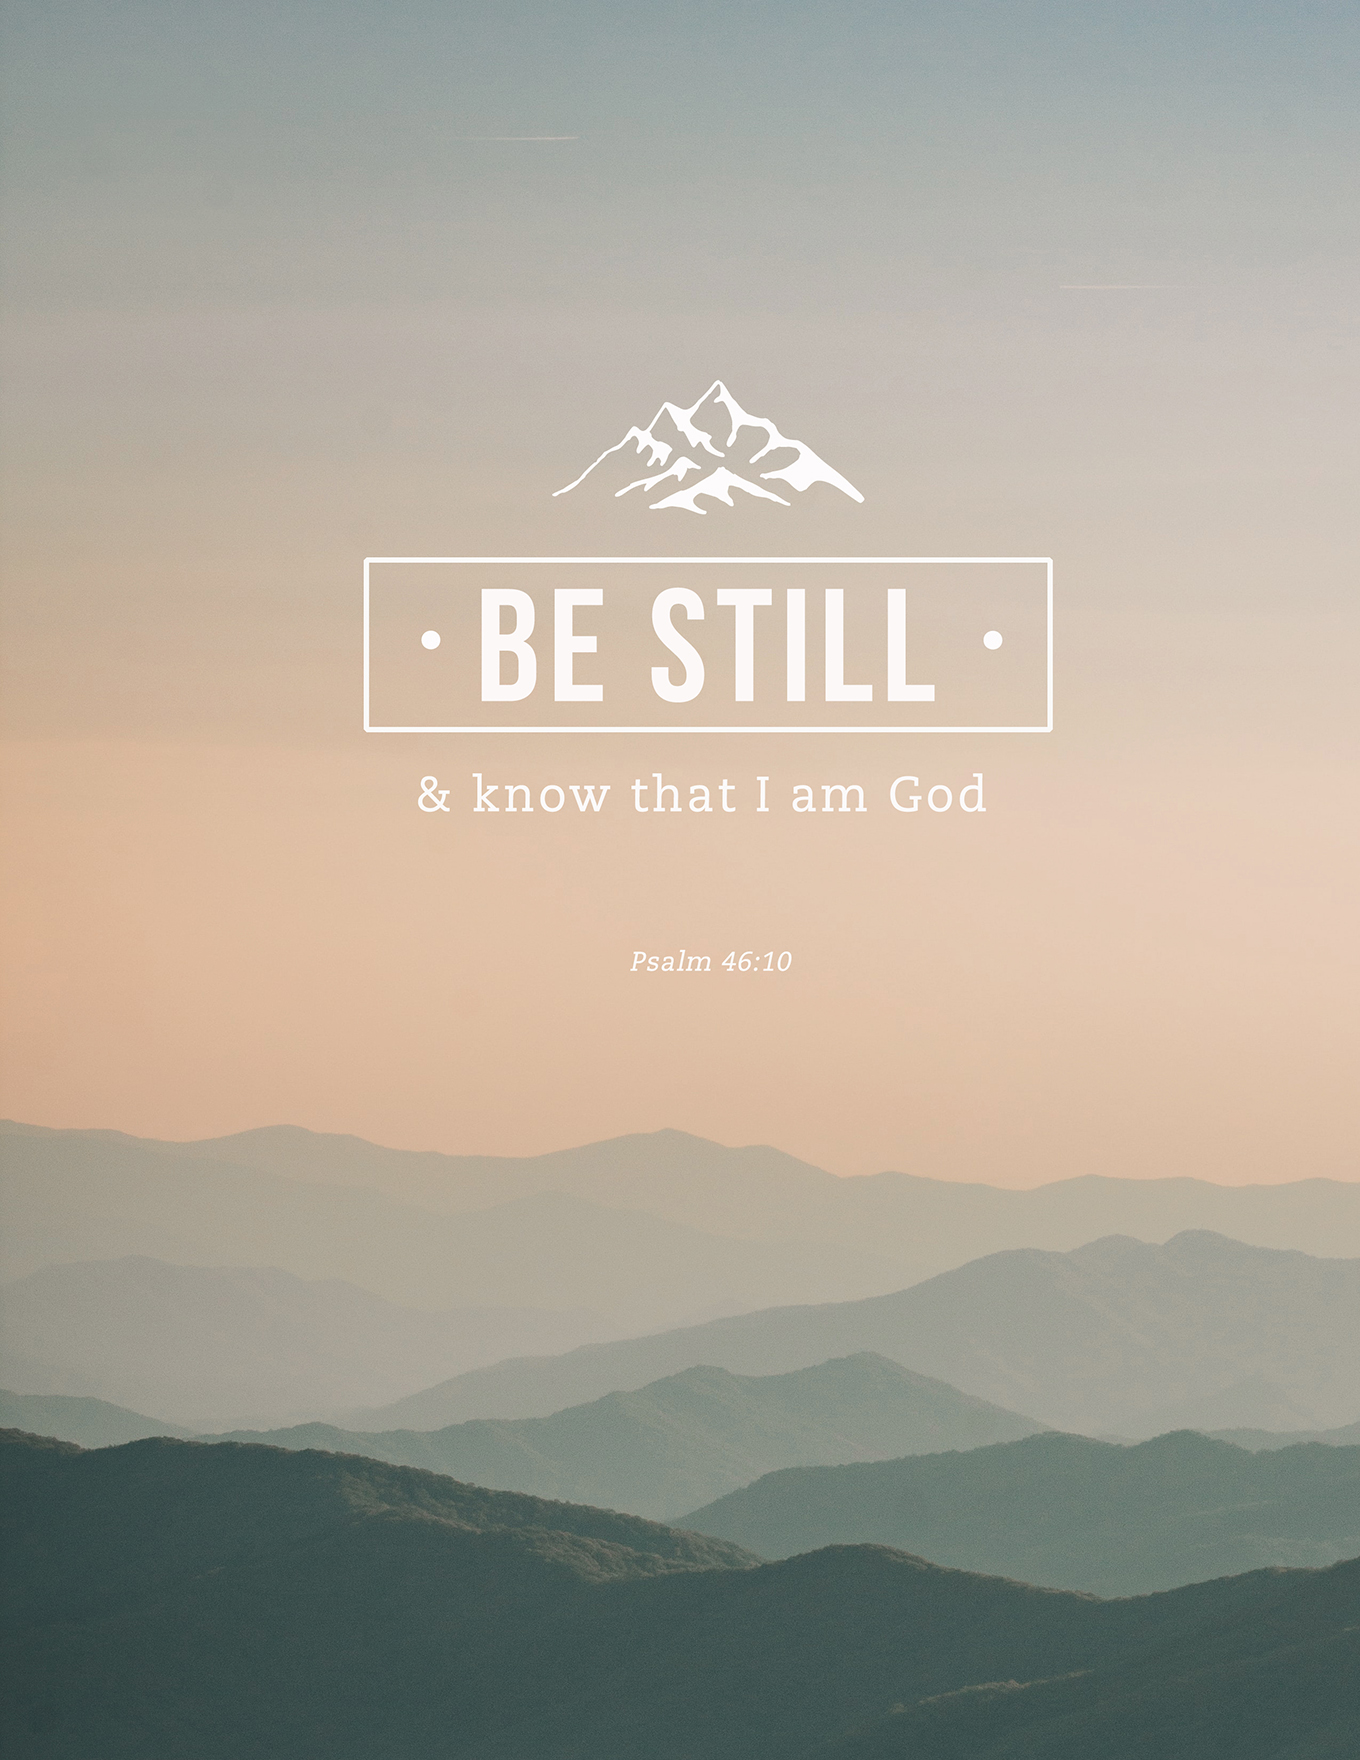 2020 Back to School Theme - Be Still and Know that I am God printable.